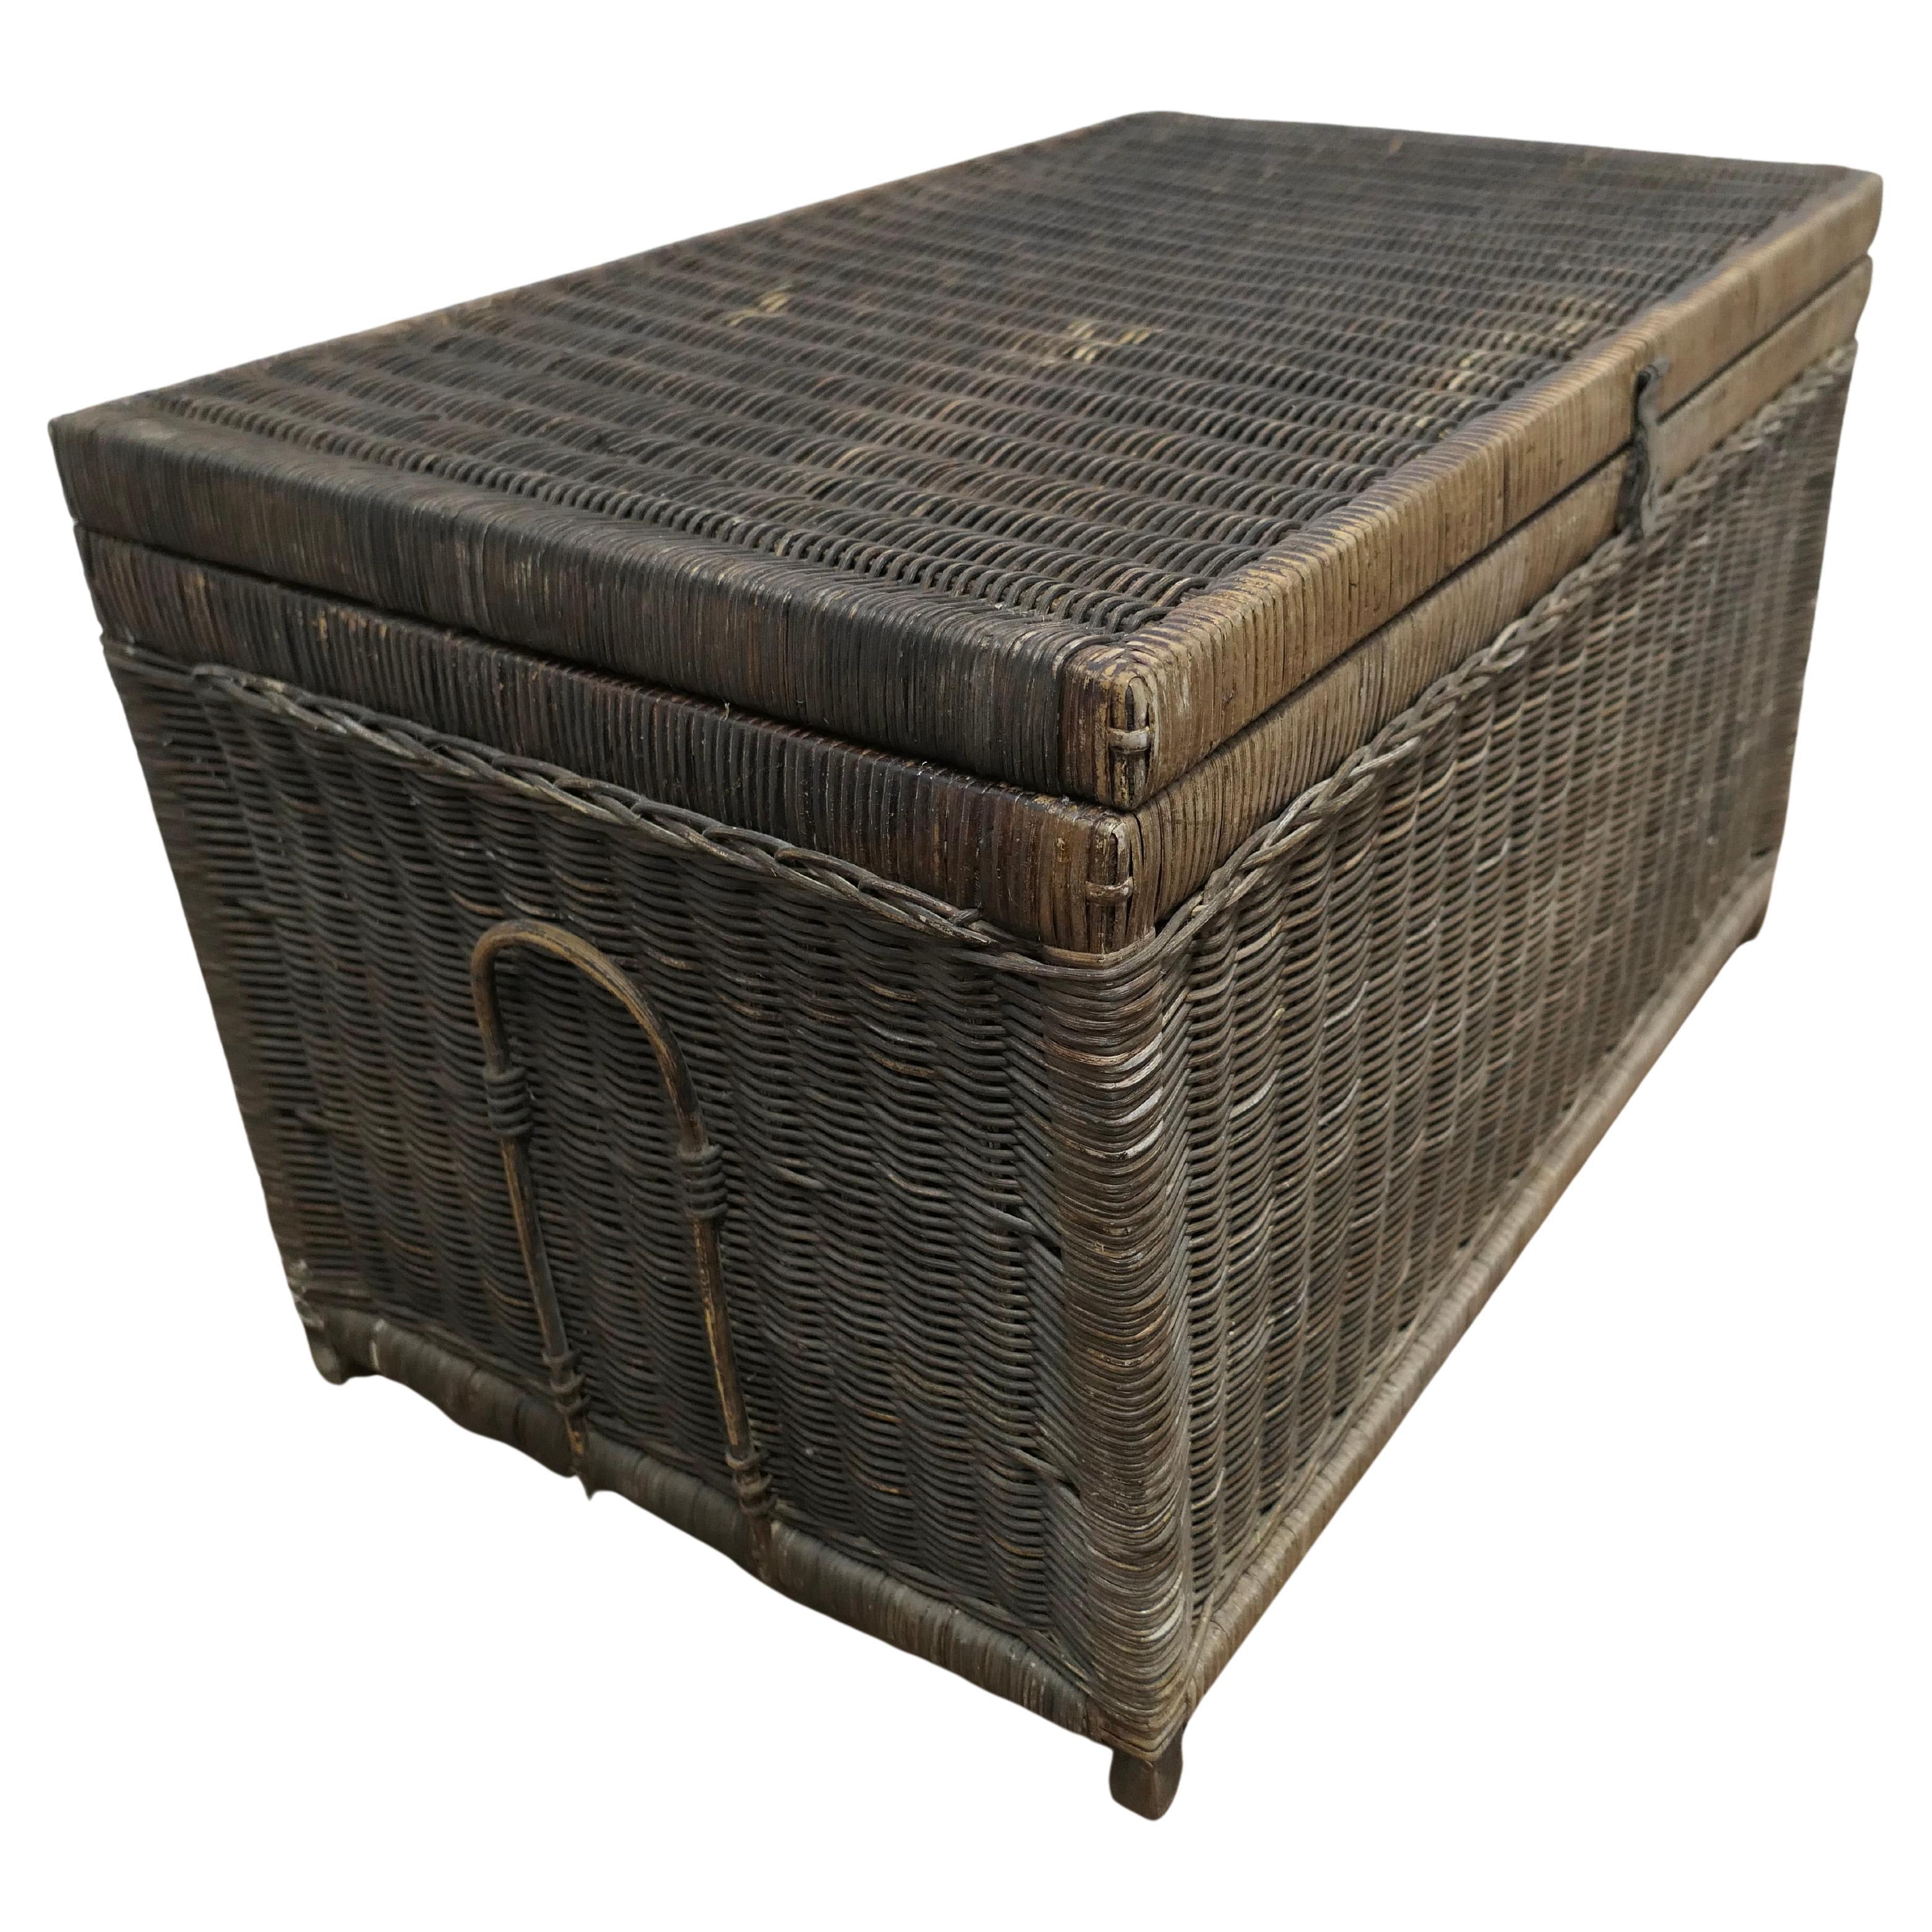 19th Century Woven Wicker Vintage Travel Chest